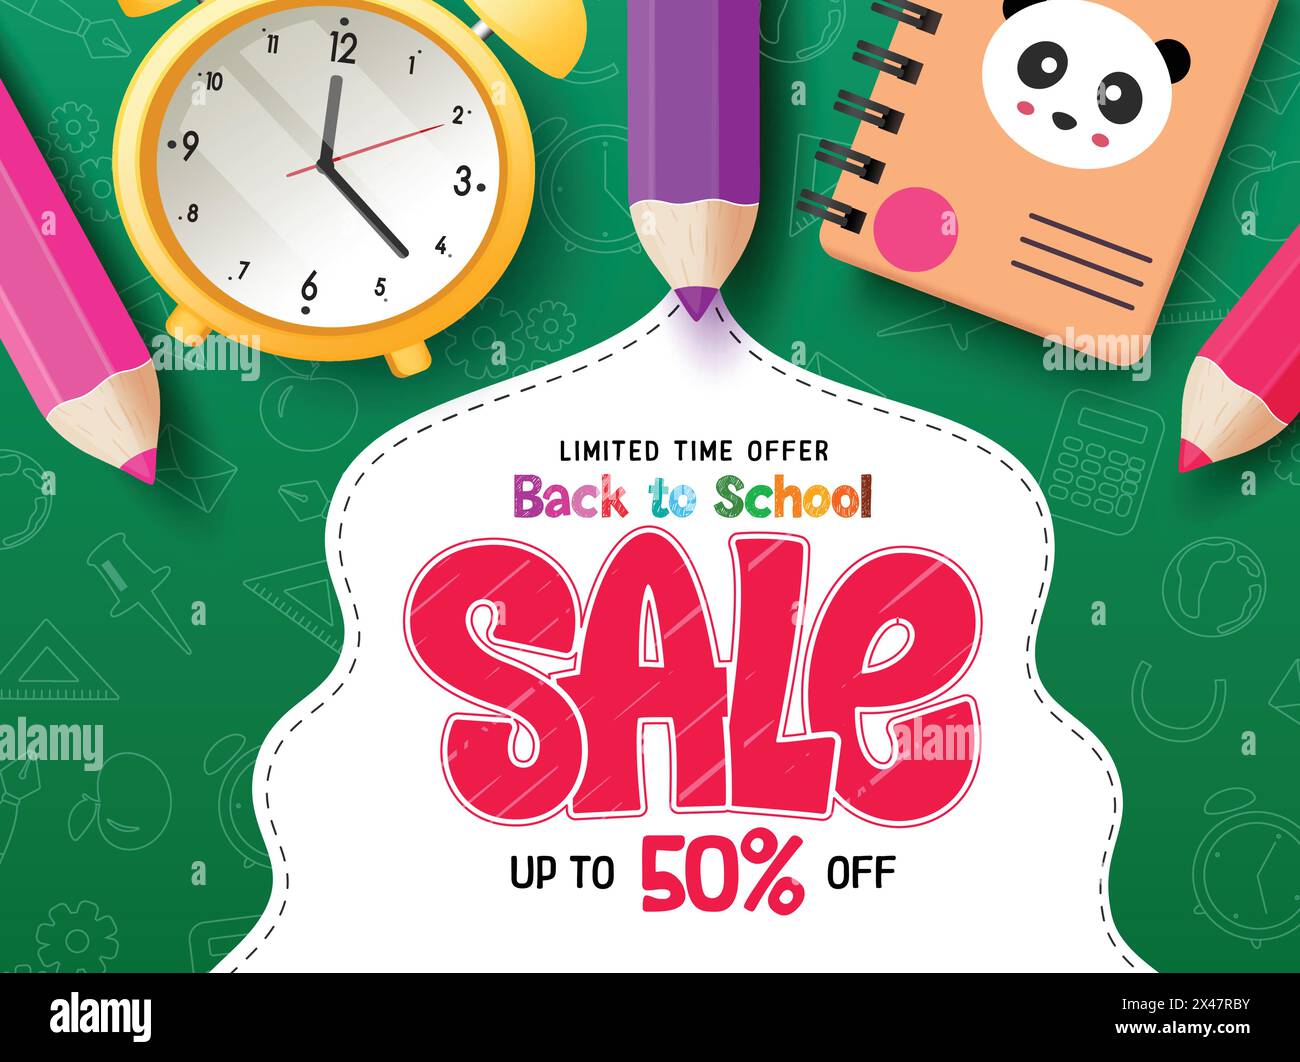 Back to school sale vector banner design. School sale limited time offer text with alarm clock, color pencil and notebook educational items supplies Stock Vector